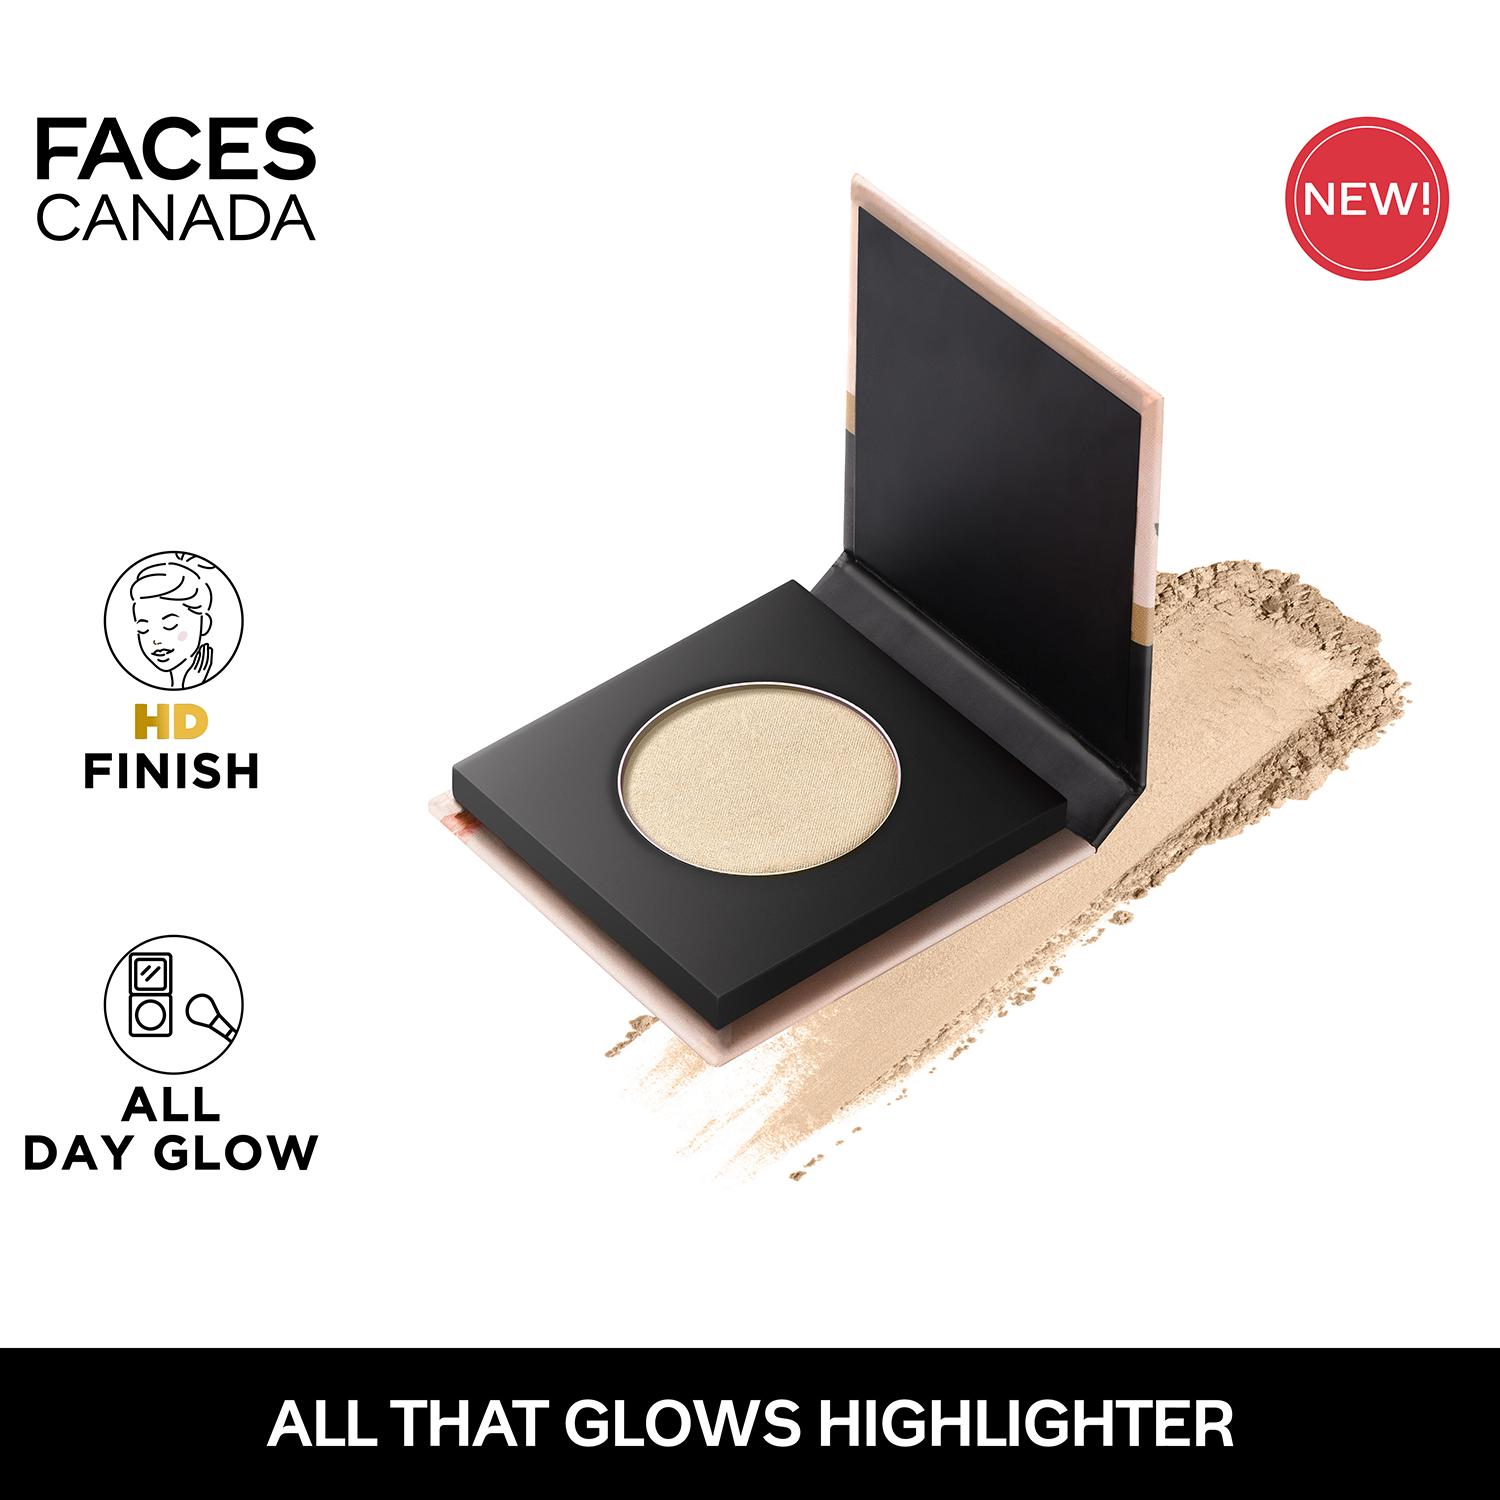 Faces Canada | Faces Canada All That Glows Highlighter - Hello Sunshine, HD Finish, Lightweight (4 g)